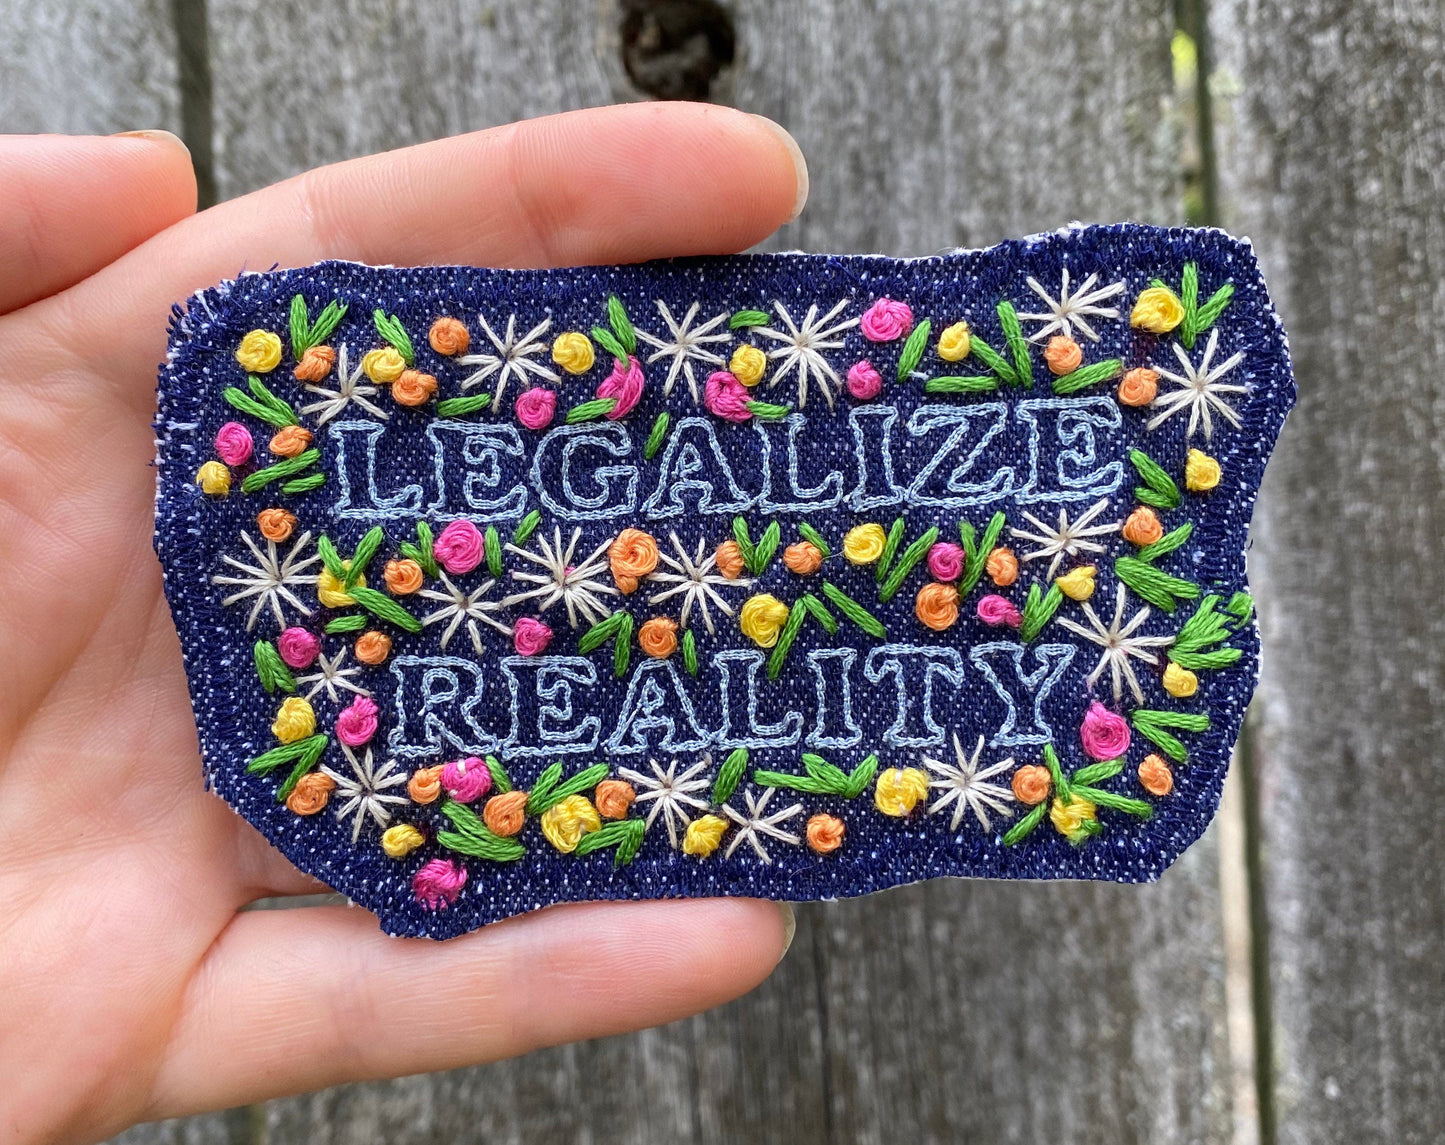 Legalize Reality  - Handmade Embroidered Denim Patch - Free Shipping